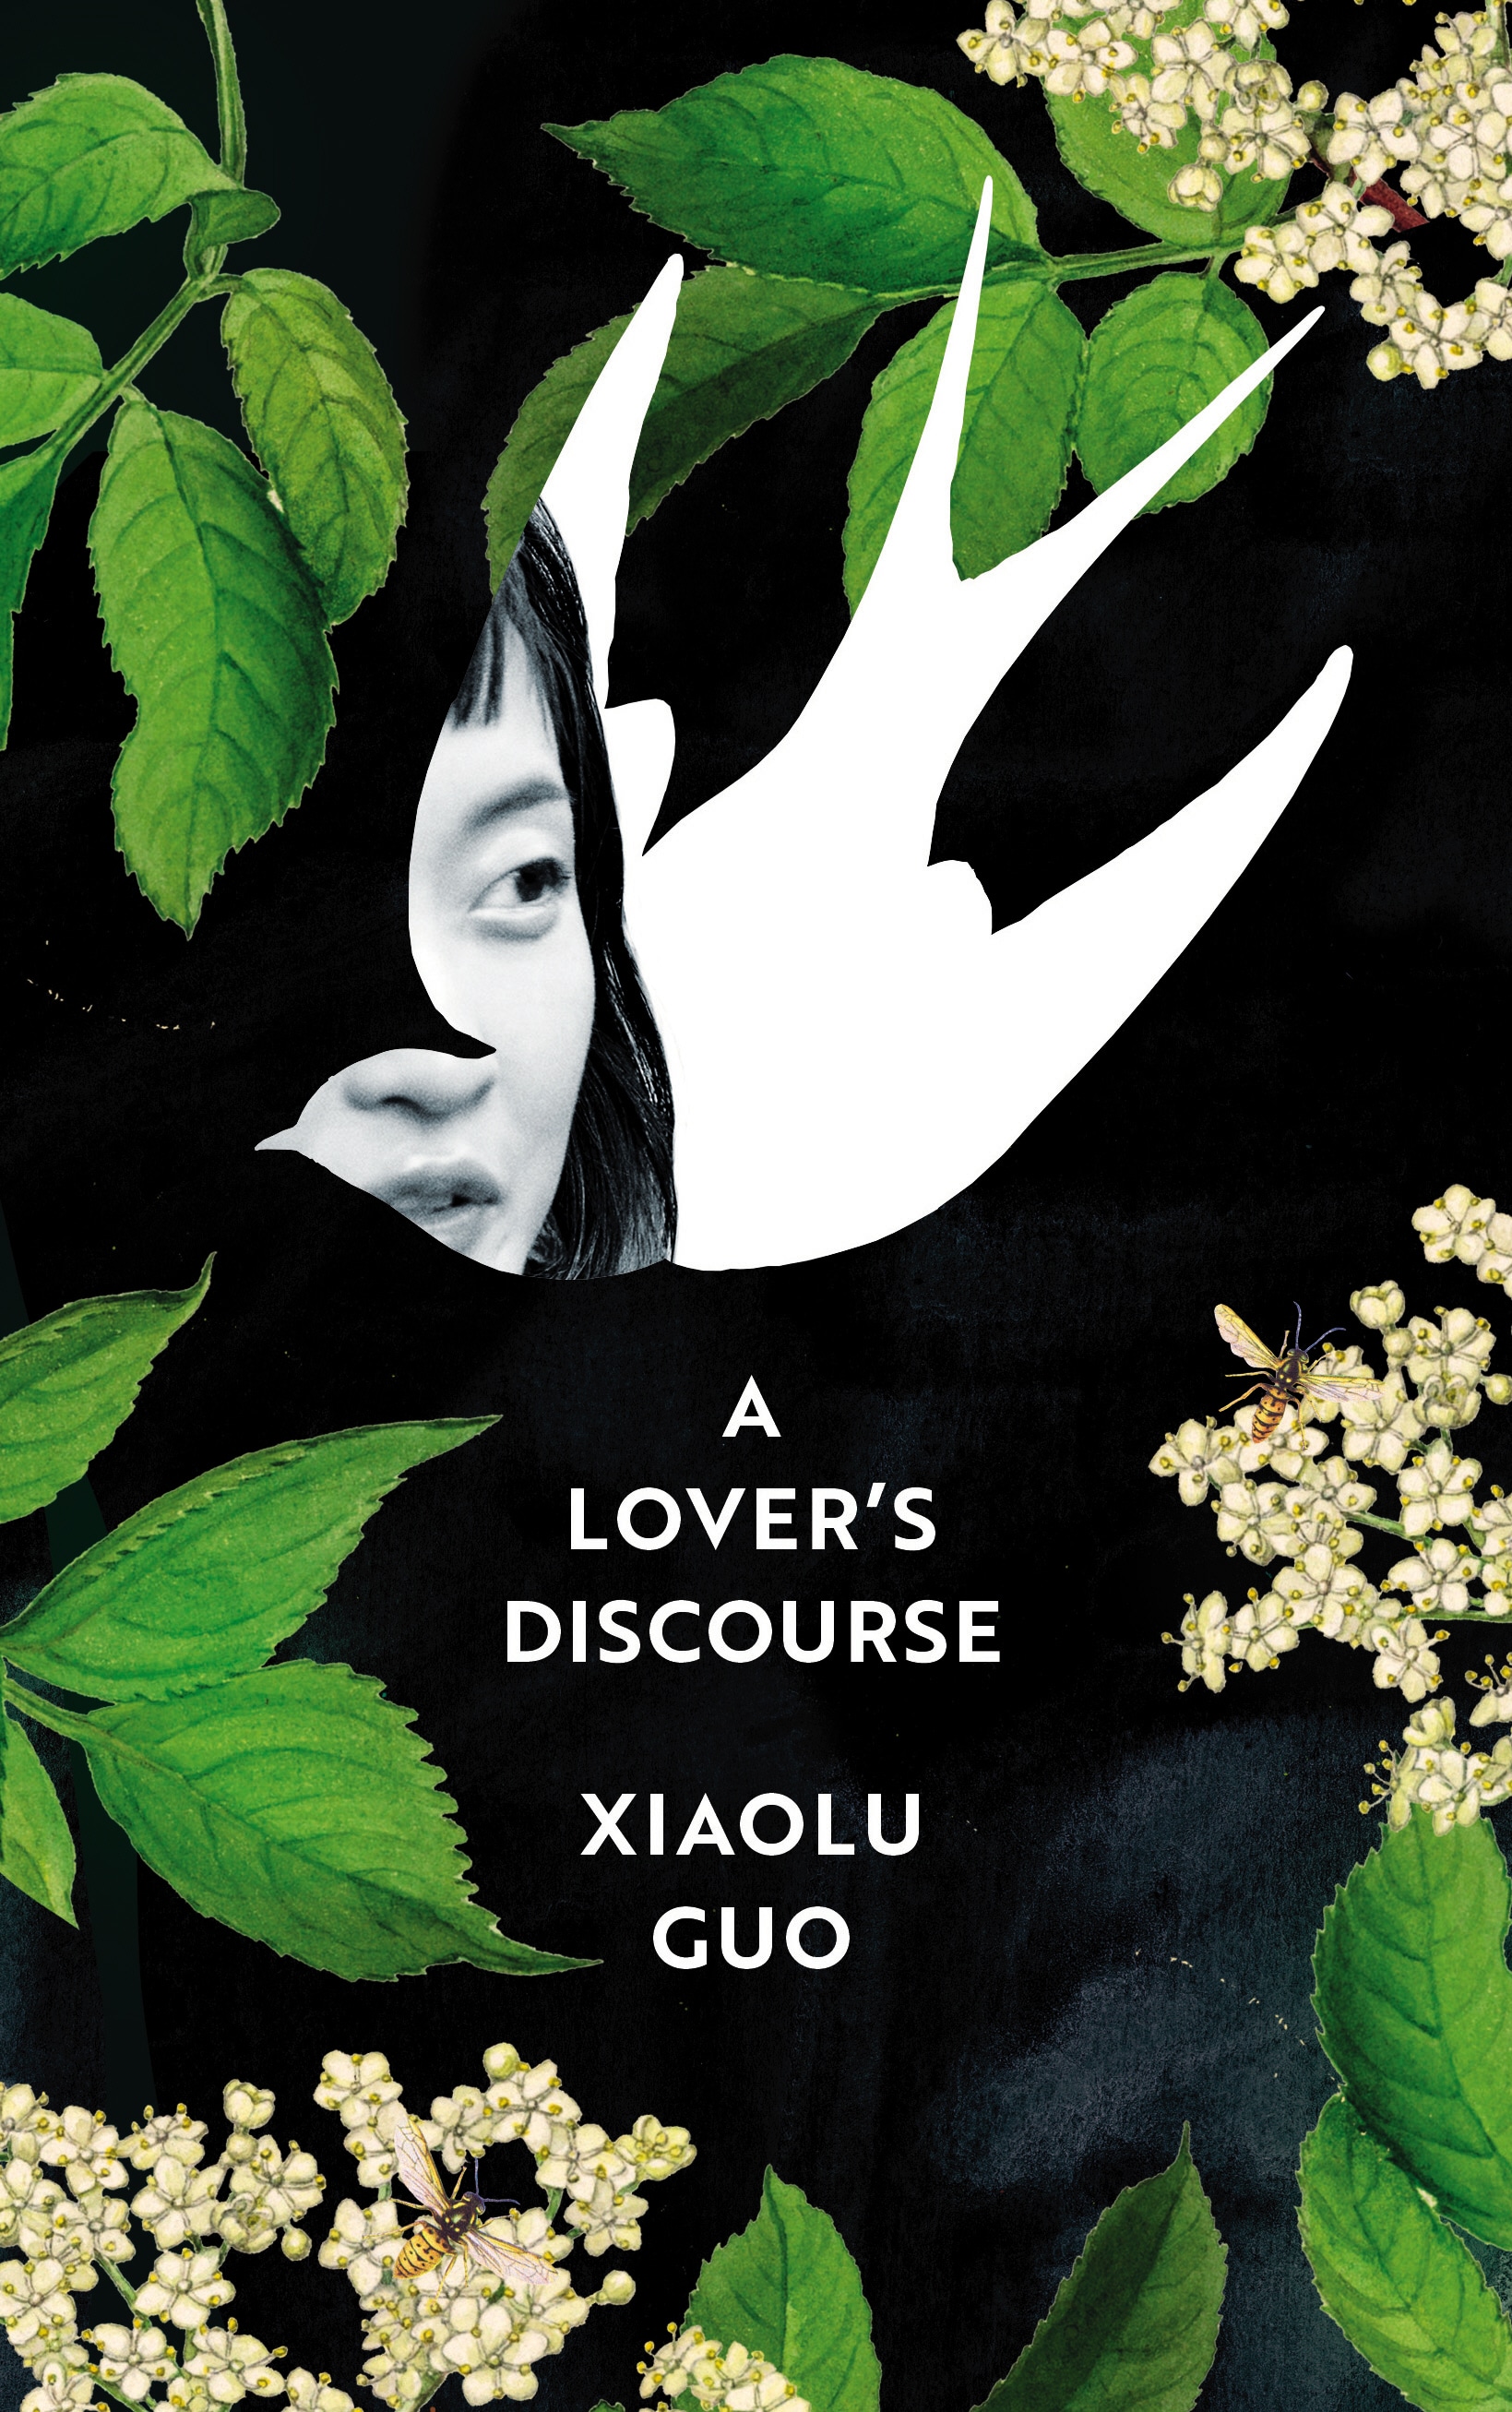 Book “A Lover's Discourse” by Xiaolu Guo — August 13, 2020